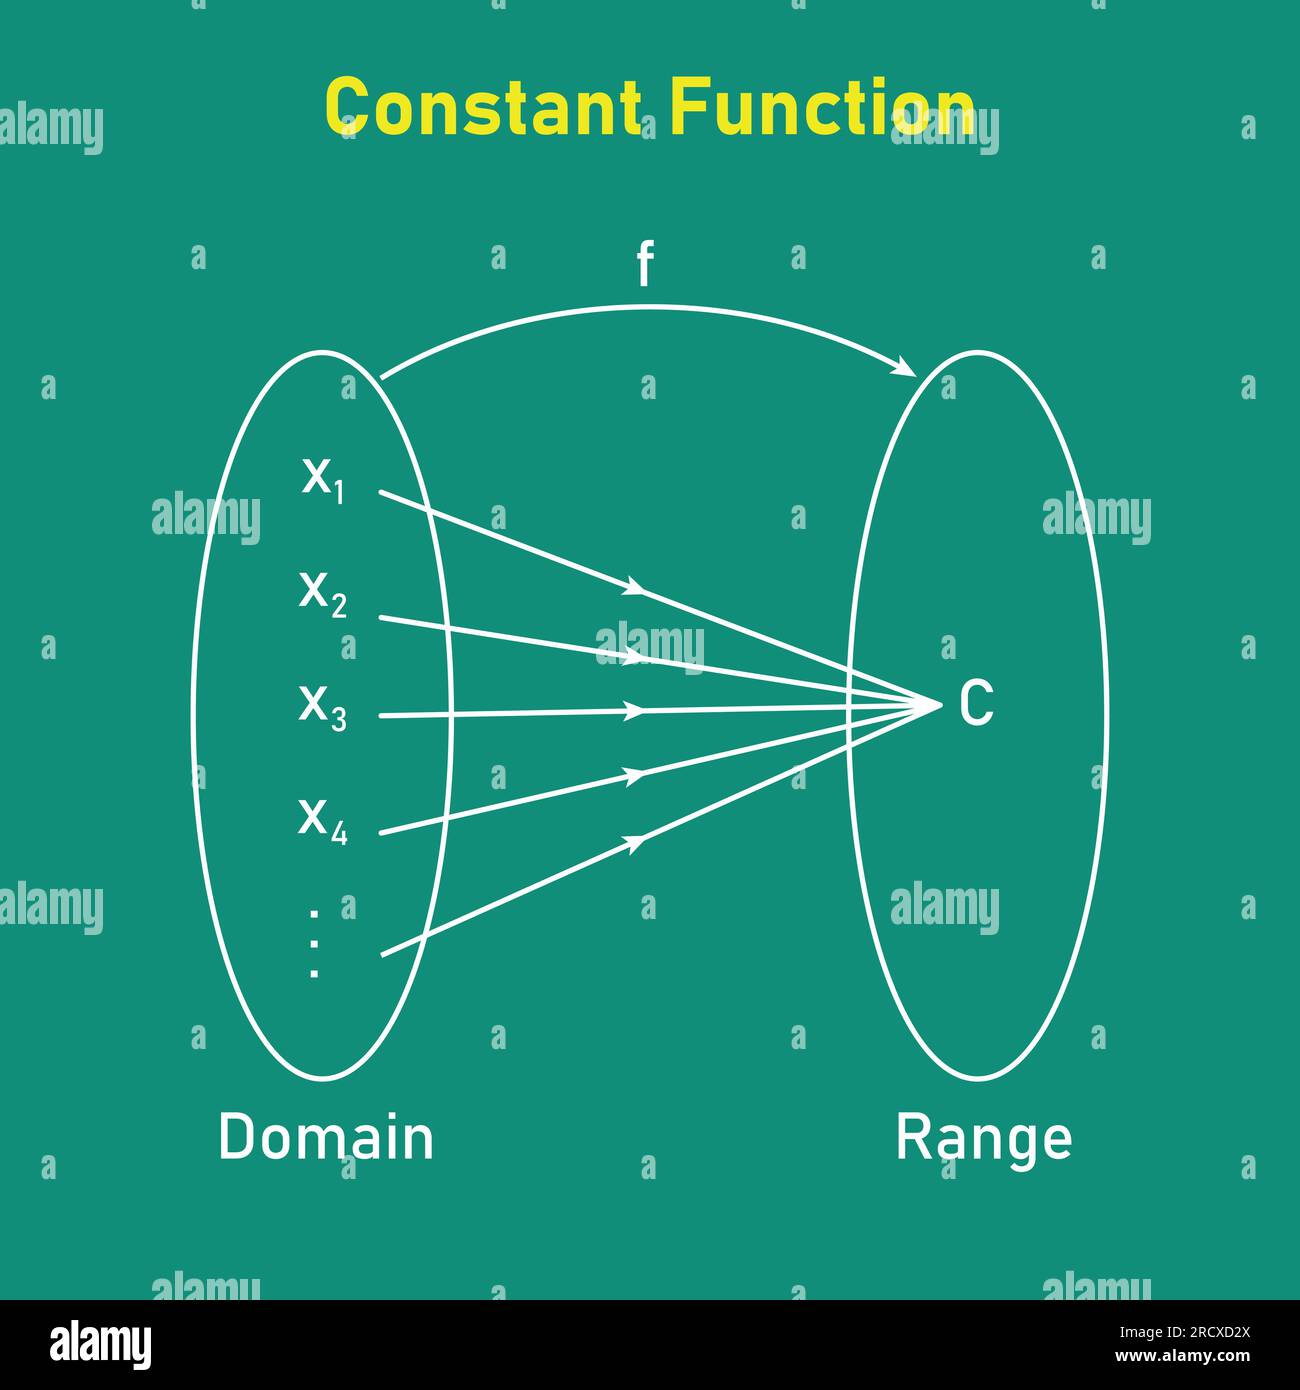 Domain and Range of a Constant Function. Mathematics resources for teachers. Vector illustration isolated on chalkboard. Stock Vector